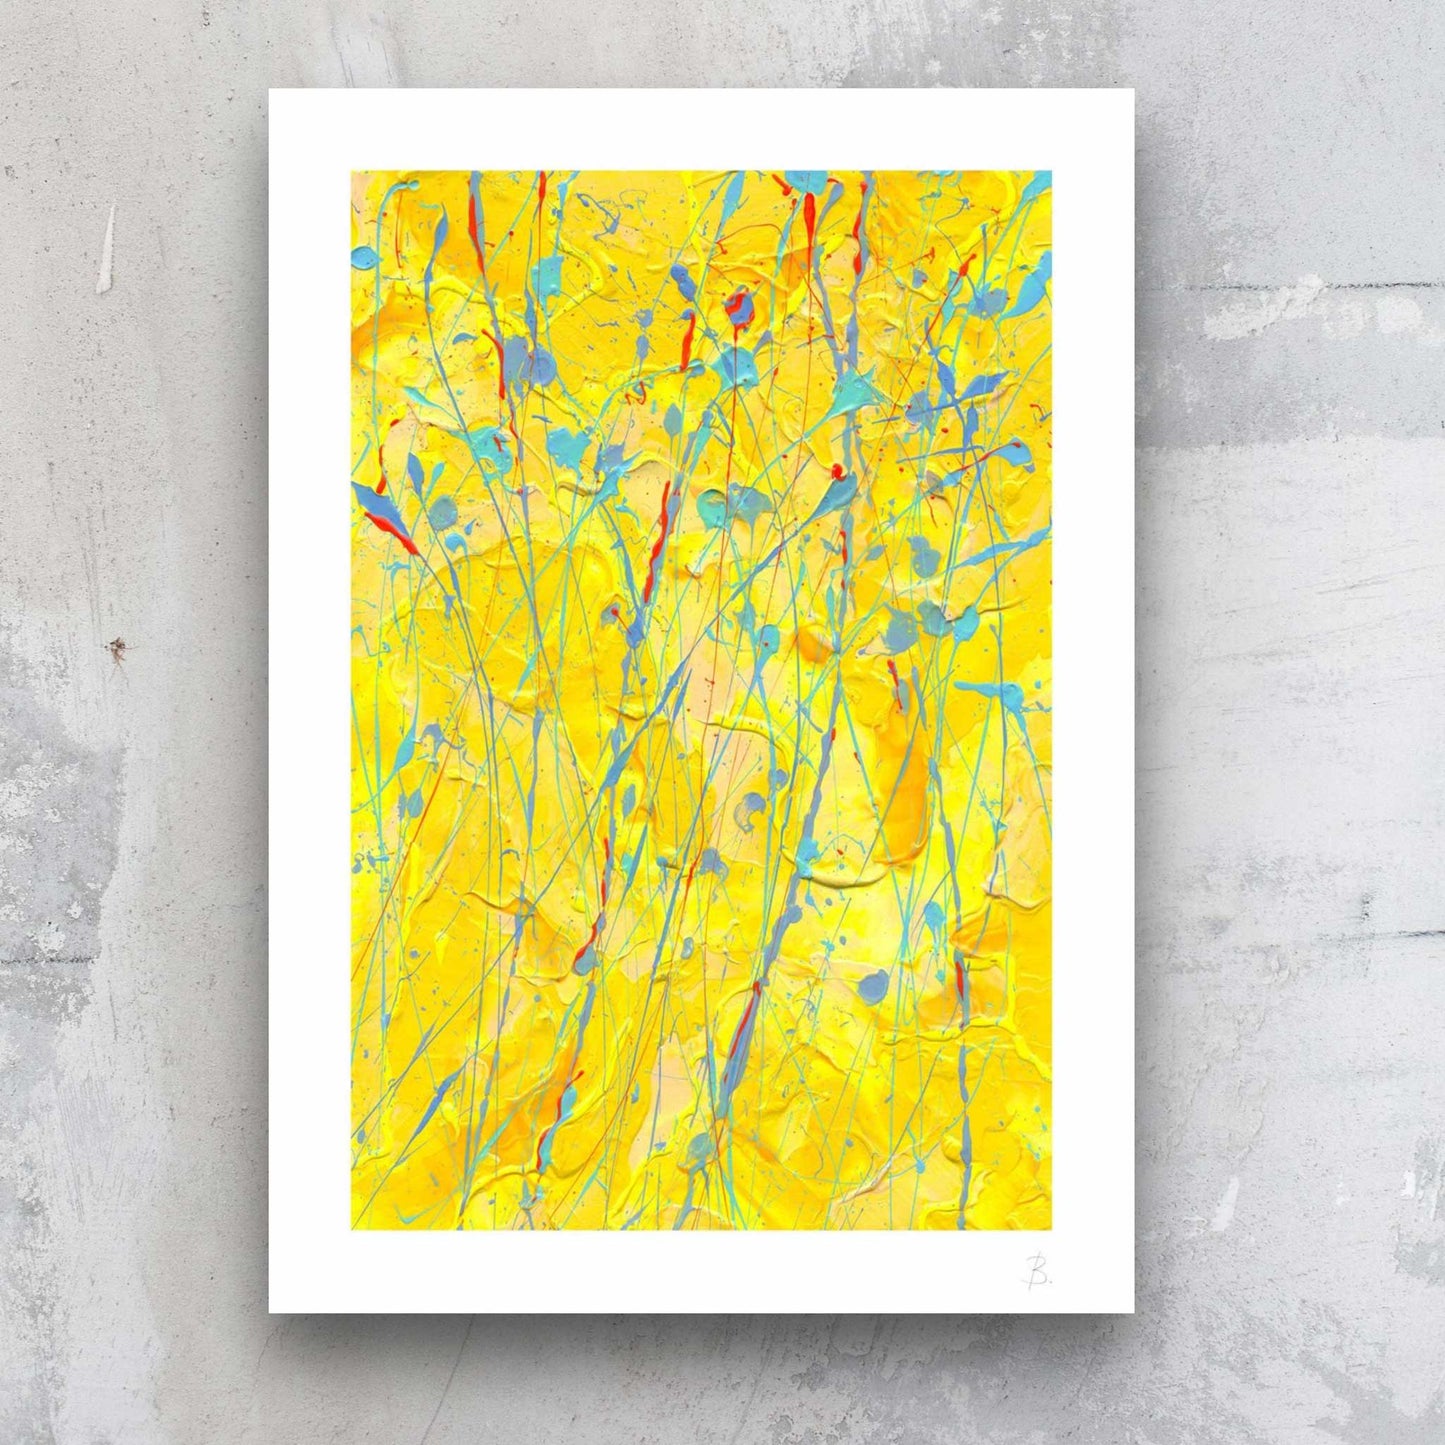 'Sunflower' archival quality, abstract art print with 2cm border, available on canvas or paper in various sizes. After the original painting by Bridget Bradley,. Abstract Expressionist Artist